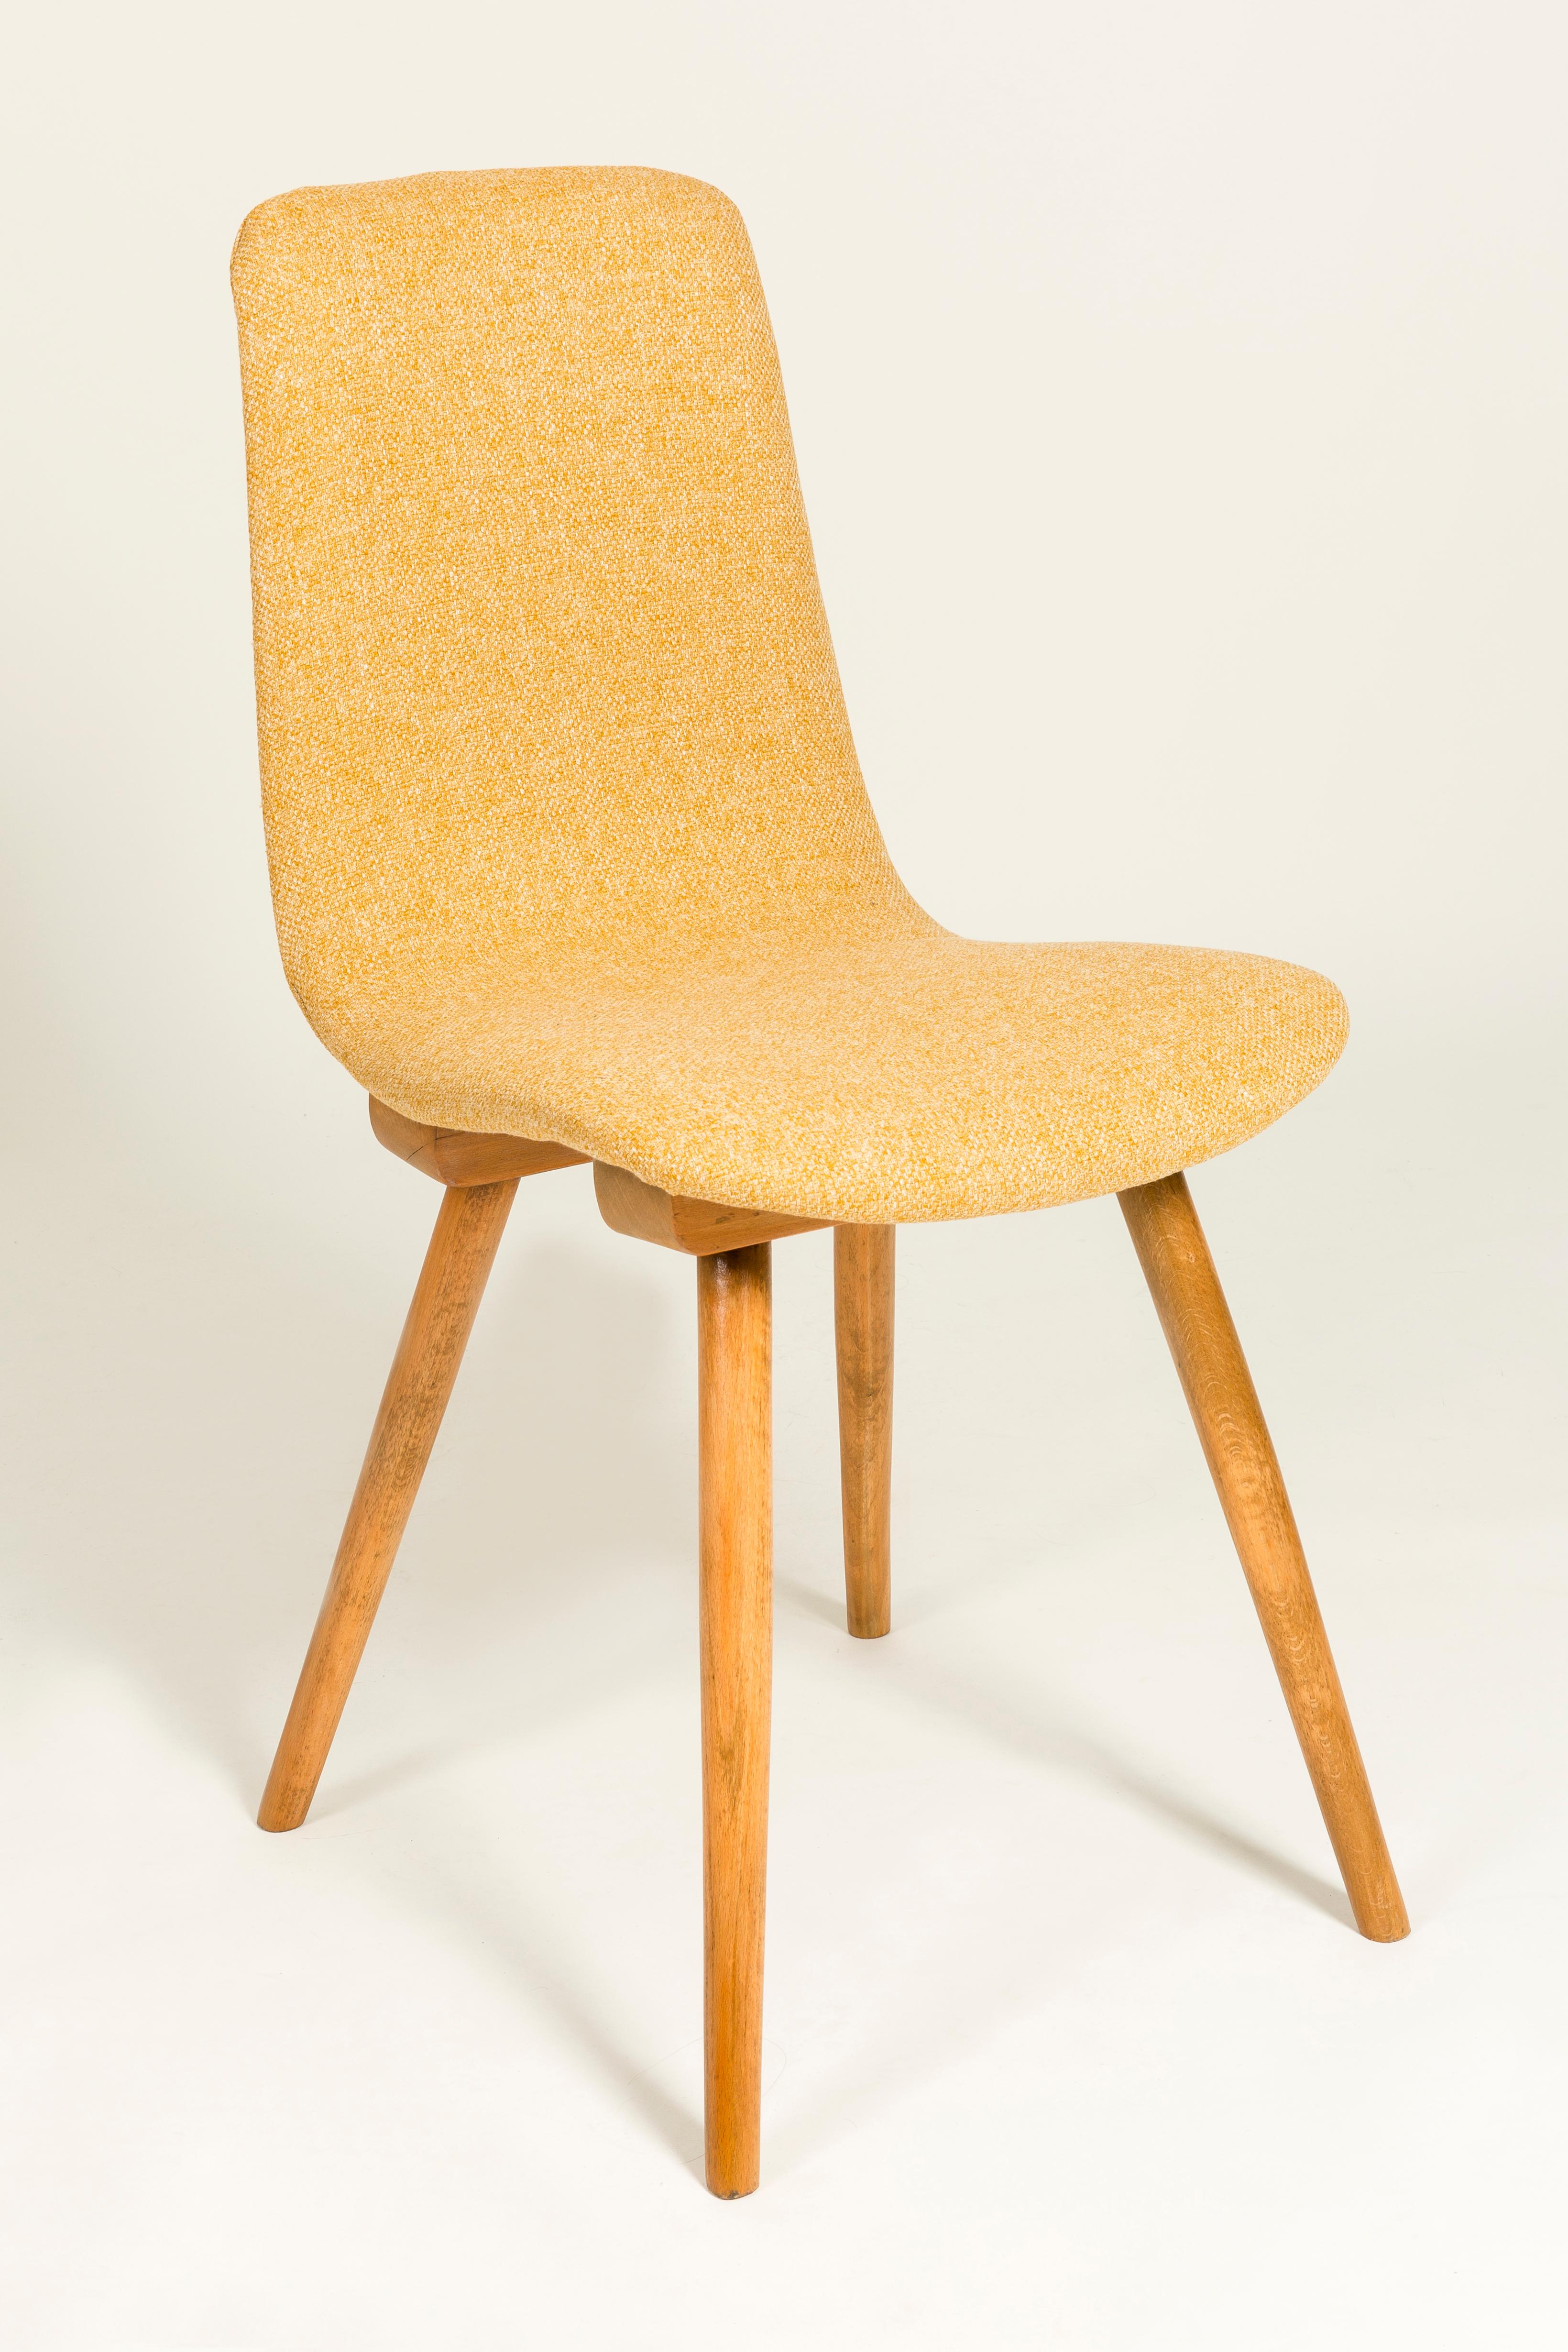 Polish Set of Six 20th Century Fameg Yellow Vintage Chairs, 1960s, Poland For Sale